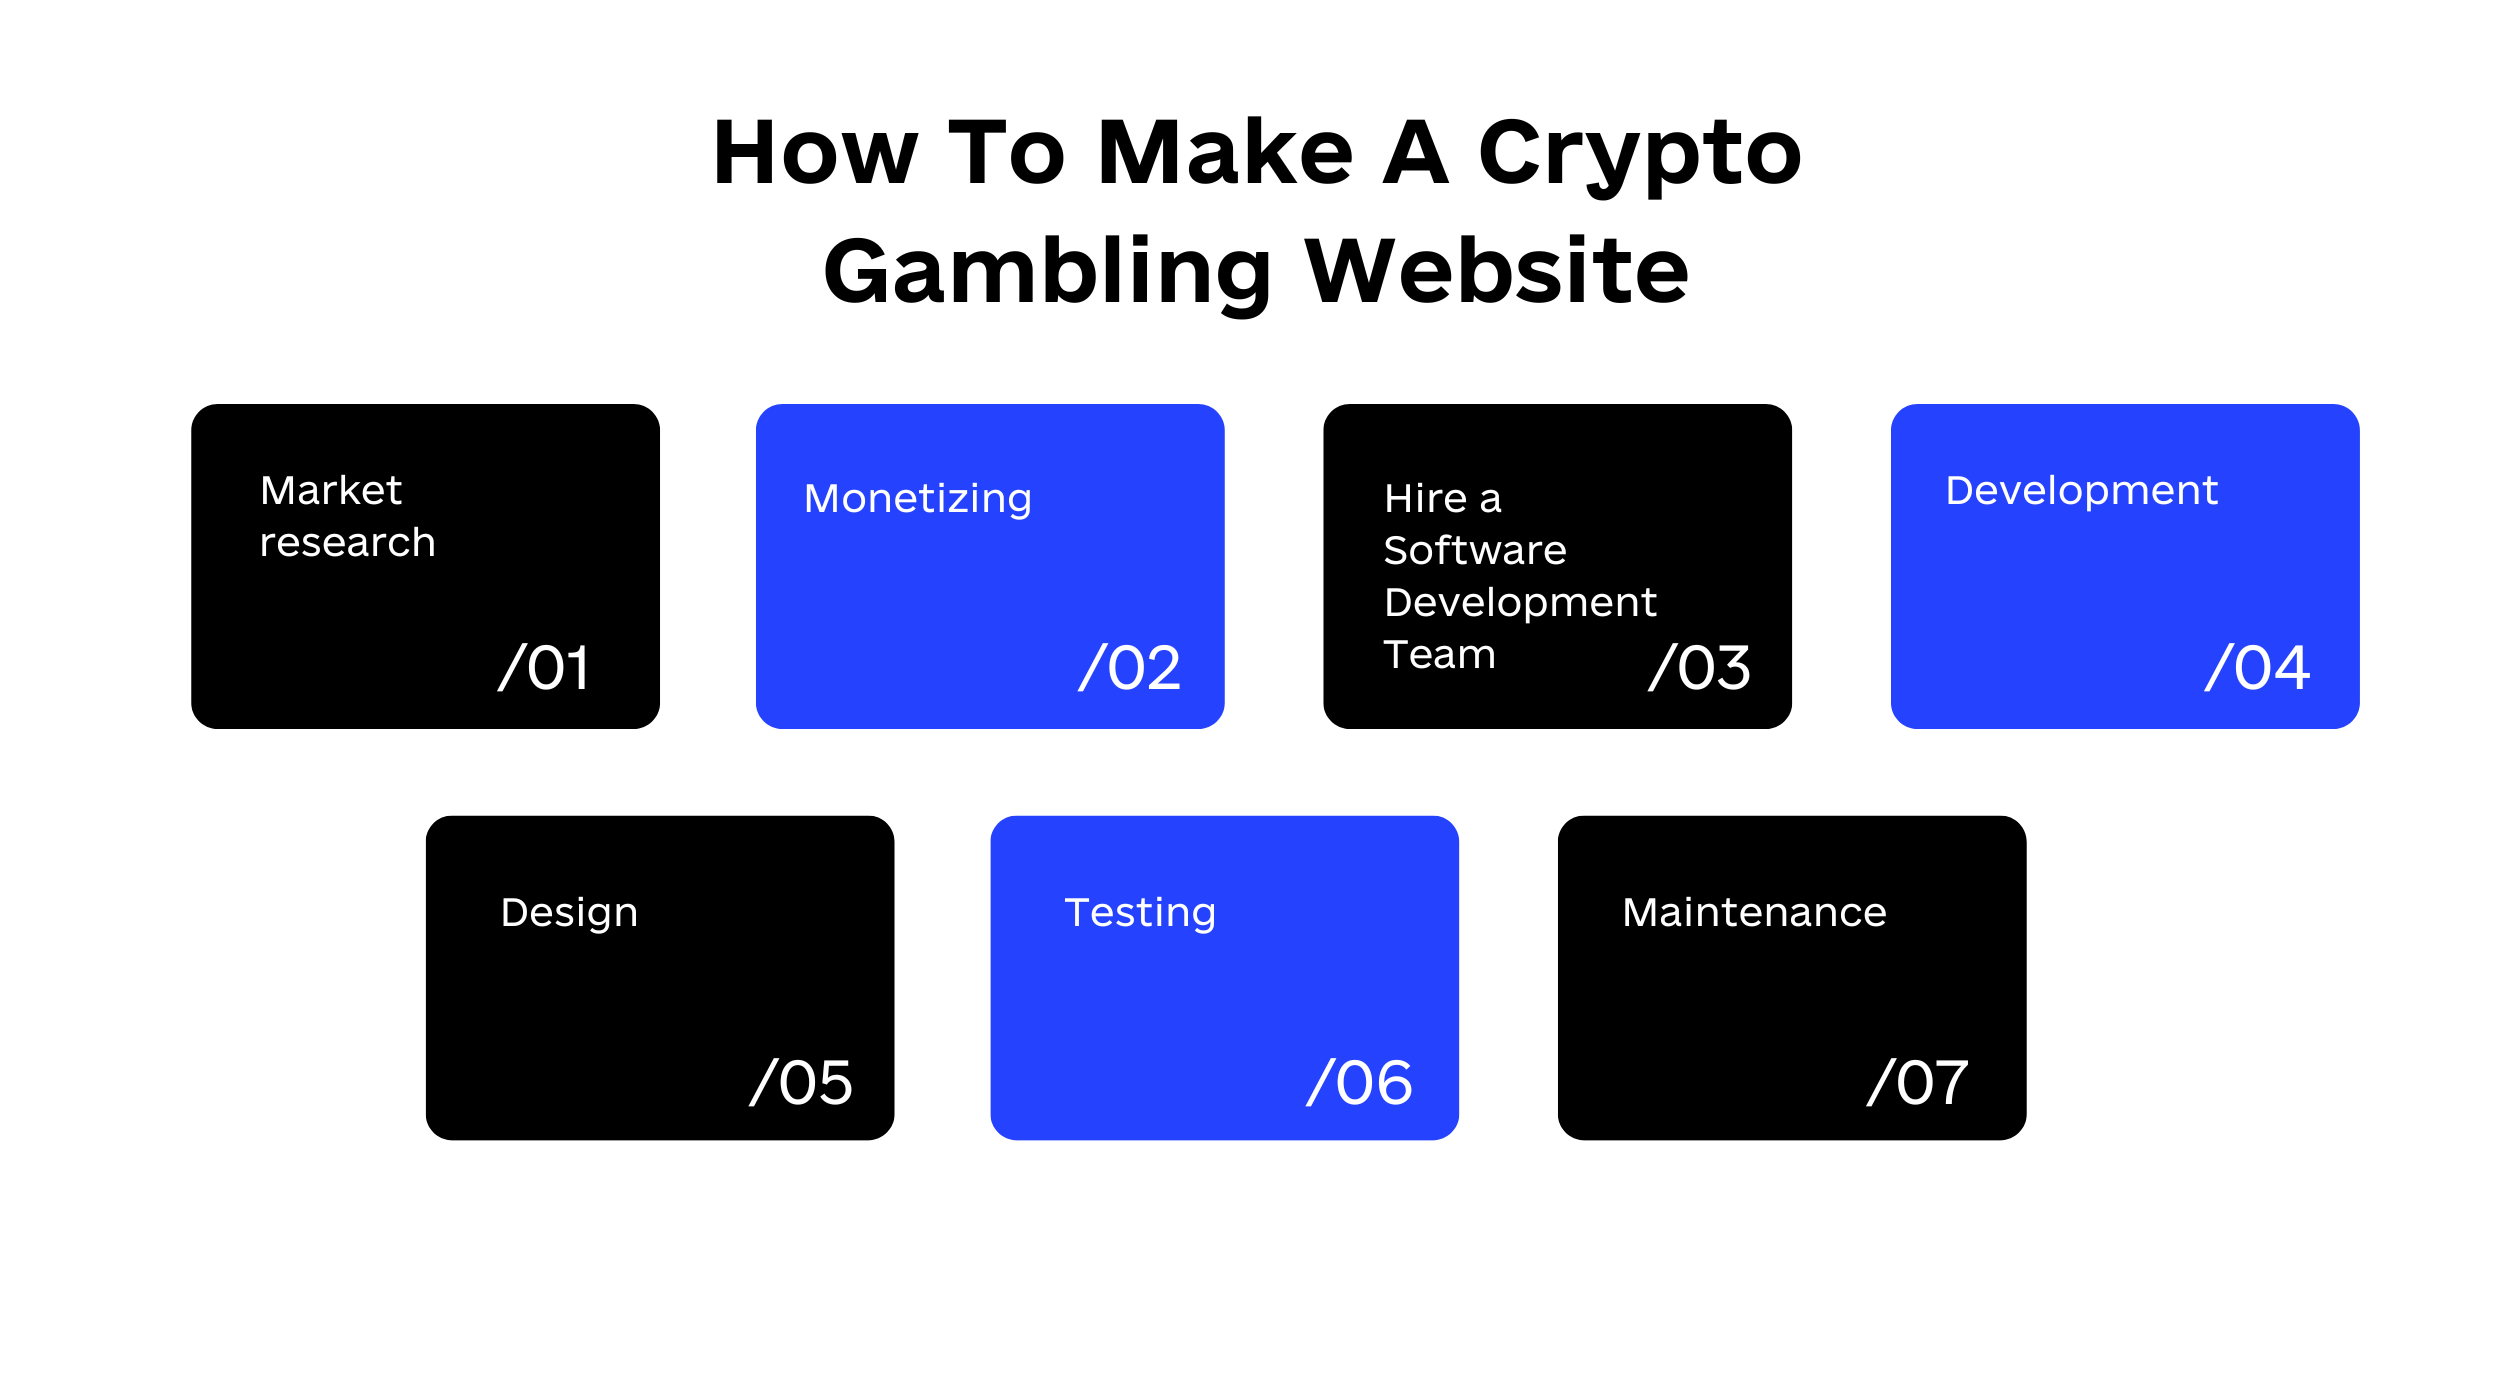 How To Make A Crypto Gambling Website